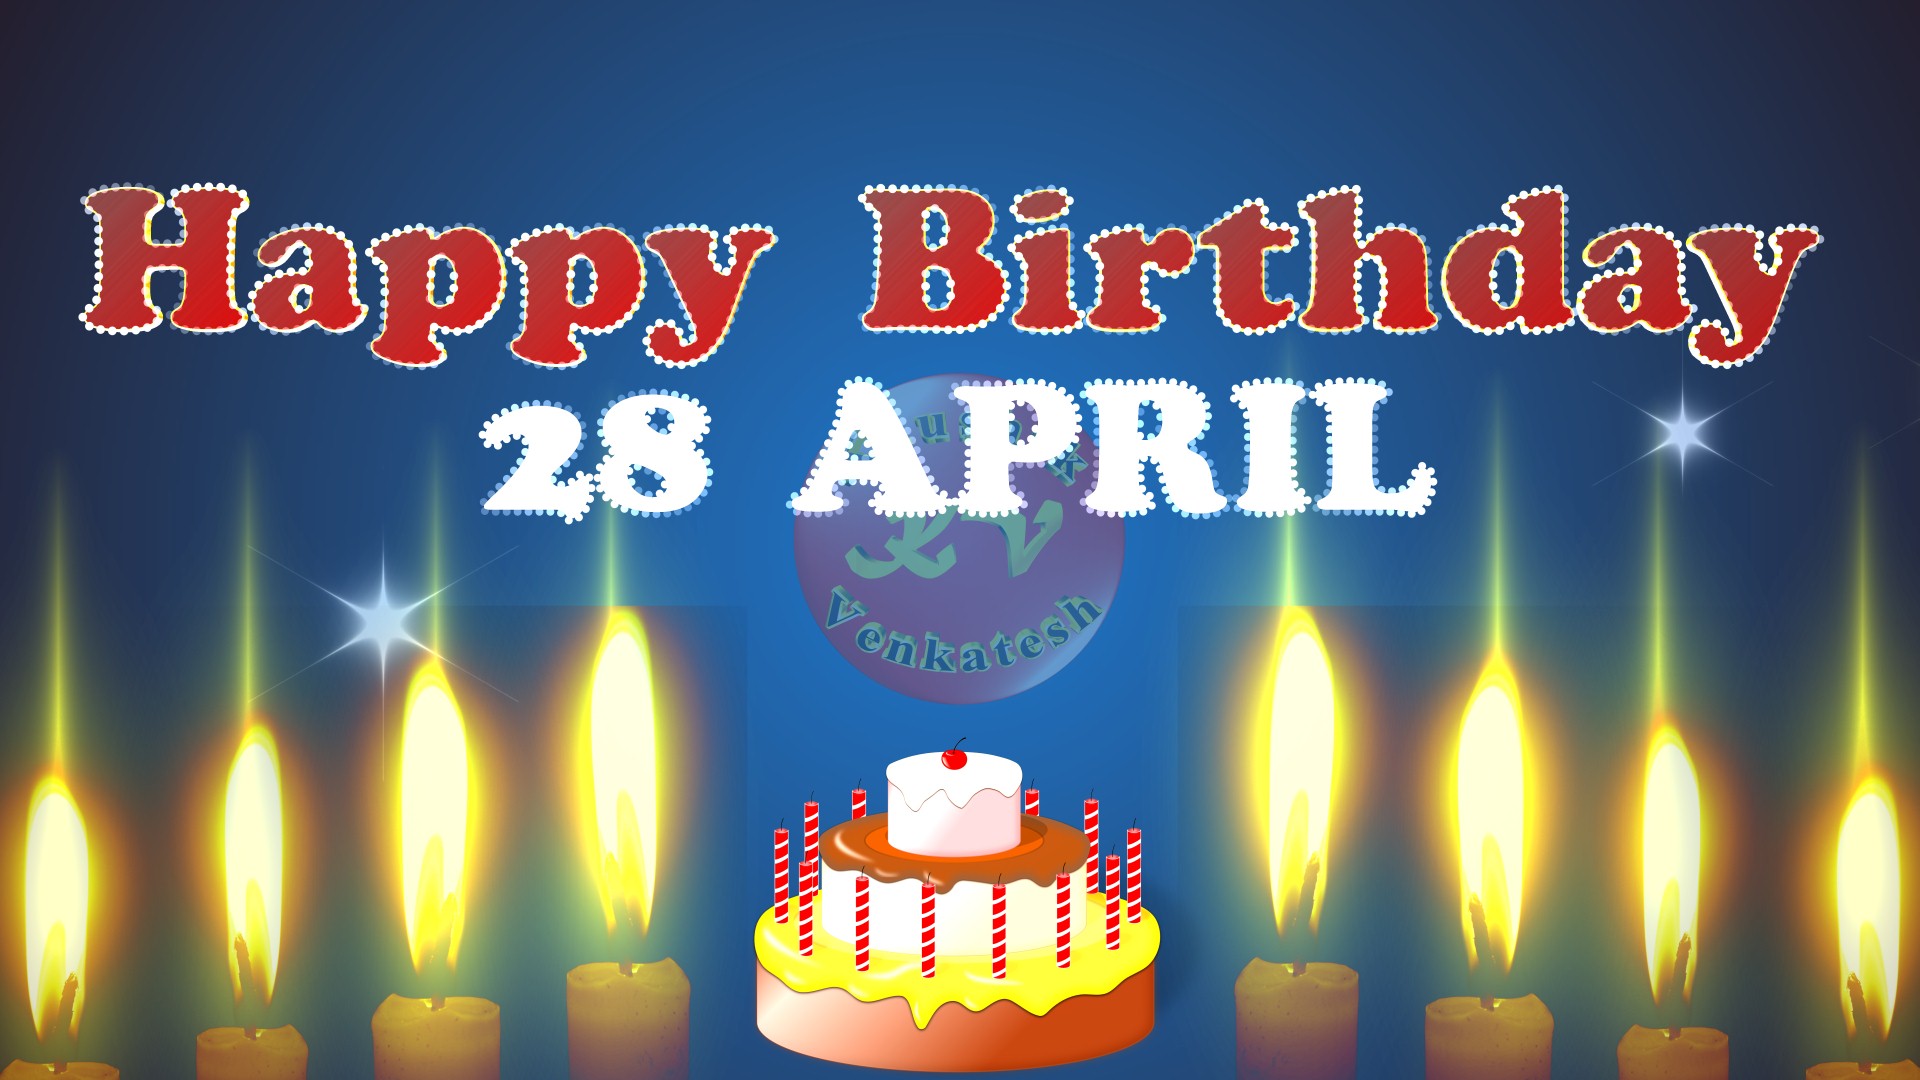 Happy Birthday 28 April, Wishes, Video, Messages, Quotes, GIF, Images, Ecard